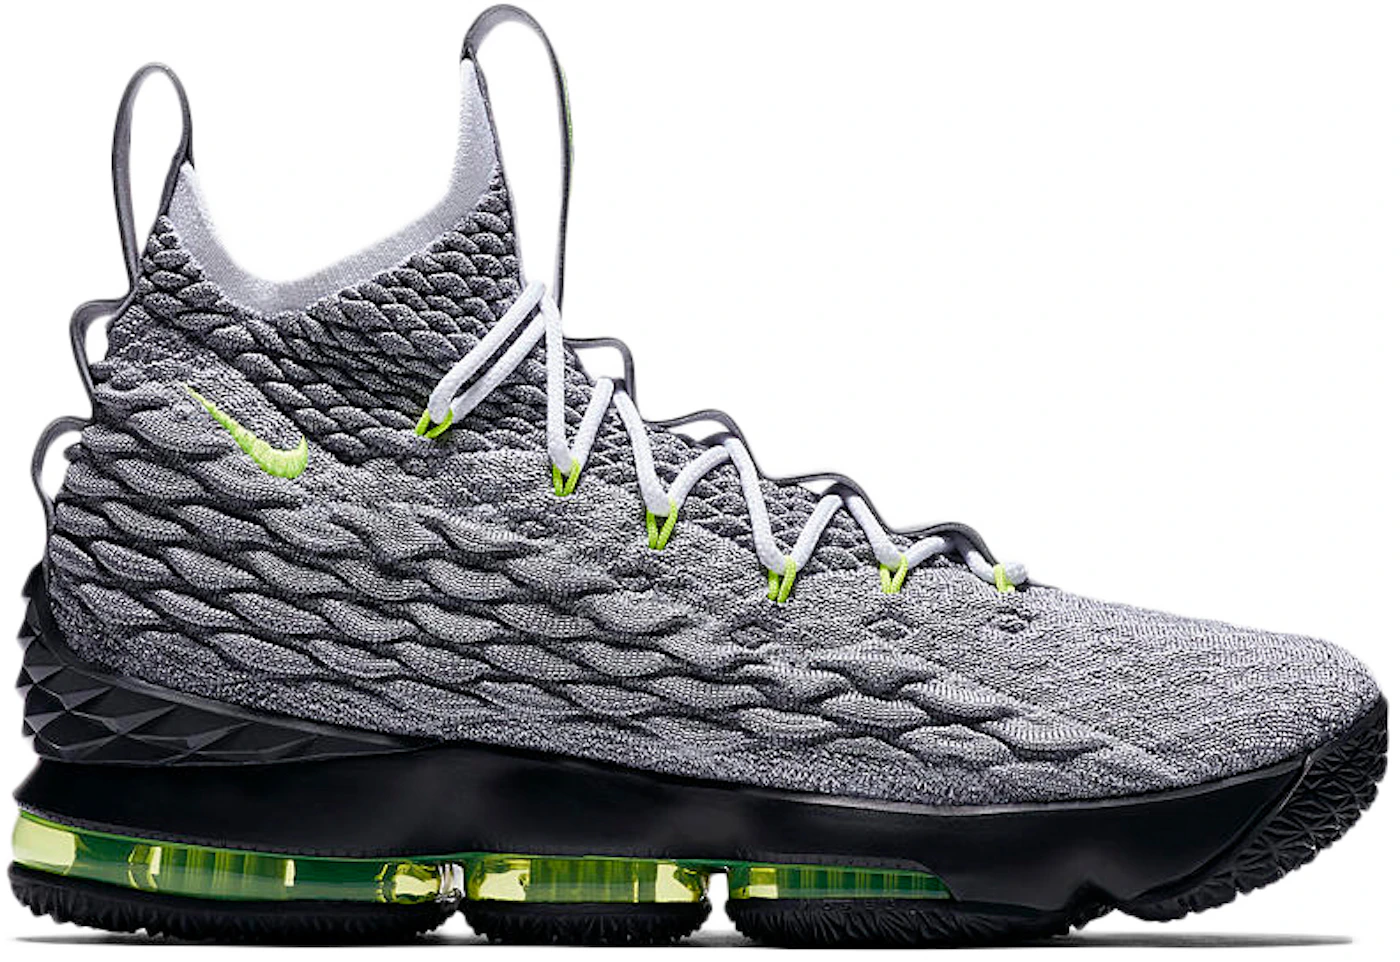 Nike LeBron 15 Air Max 95 (House Hoops Special Box and Accessories) - AR4831-001 -